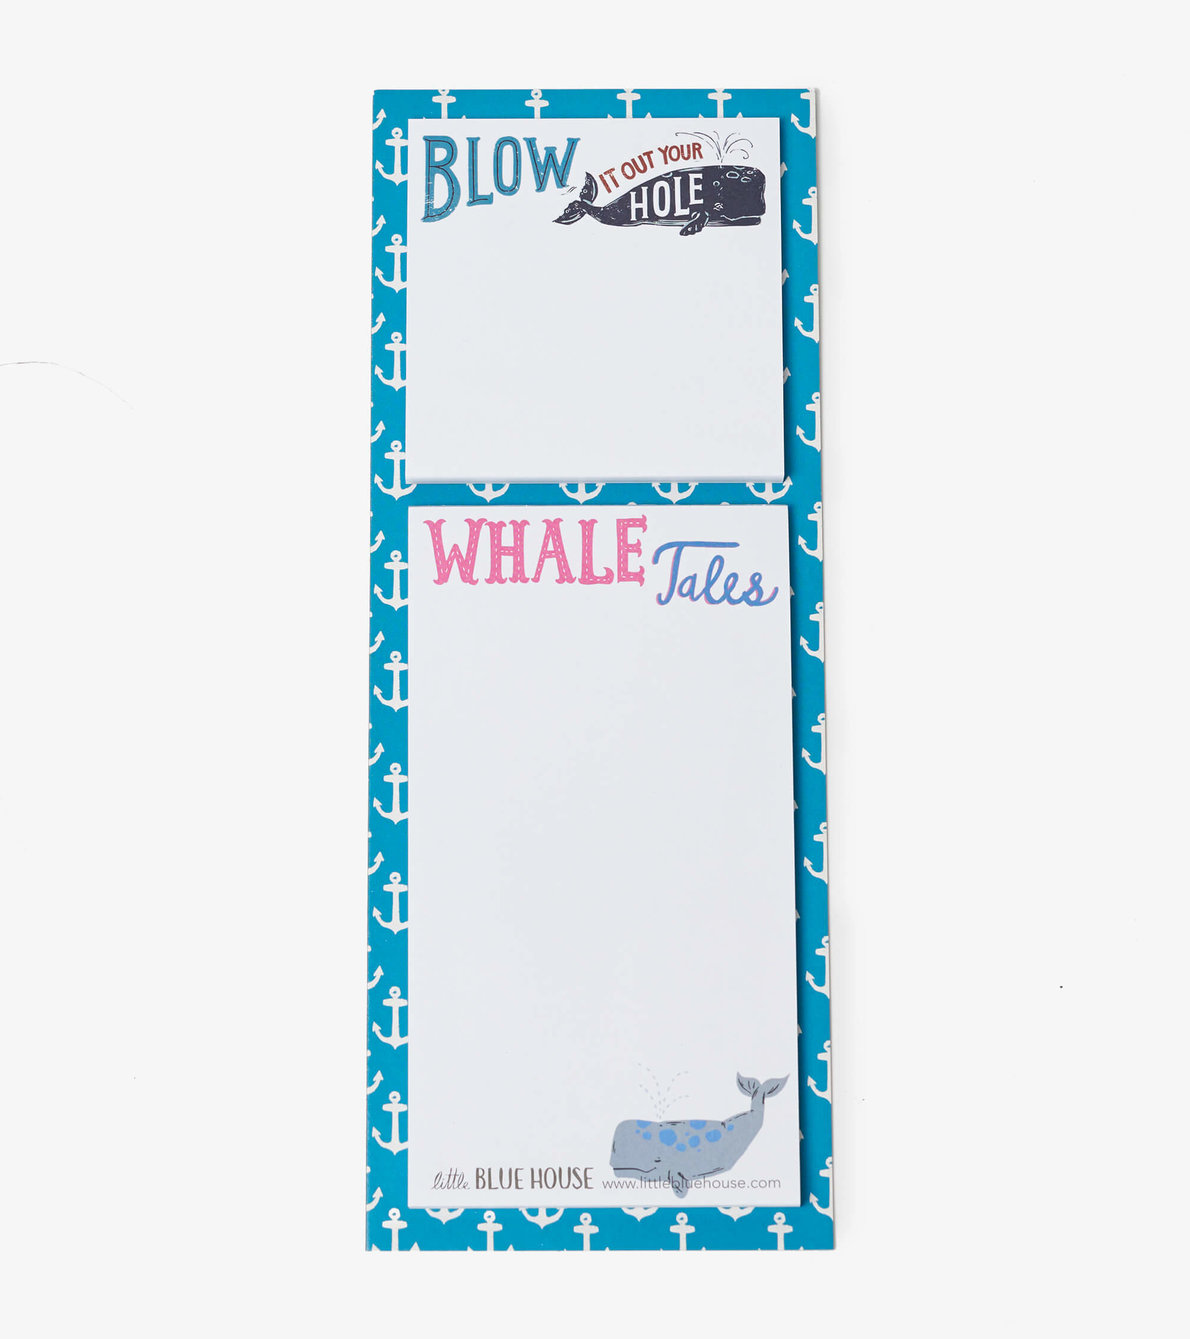 View larger image of Blow It Out Your Hole Sticky Notes & Magnetic List